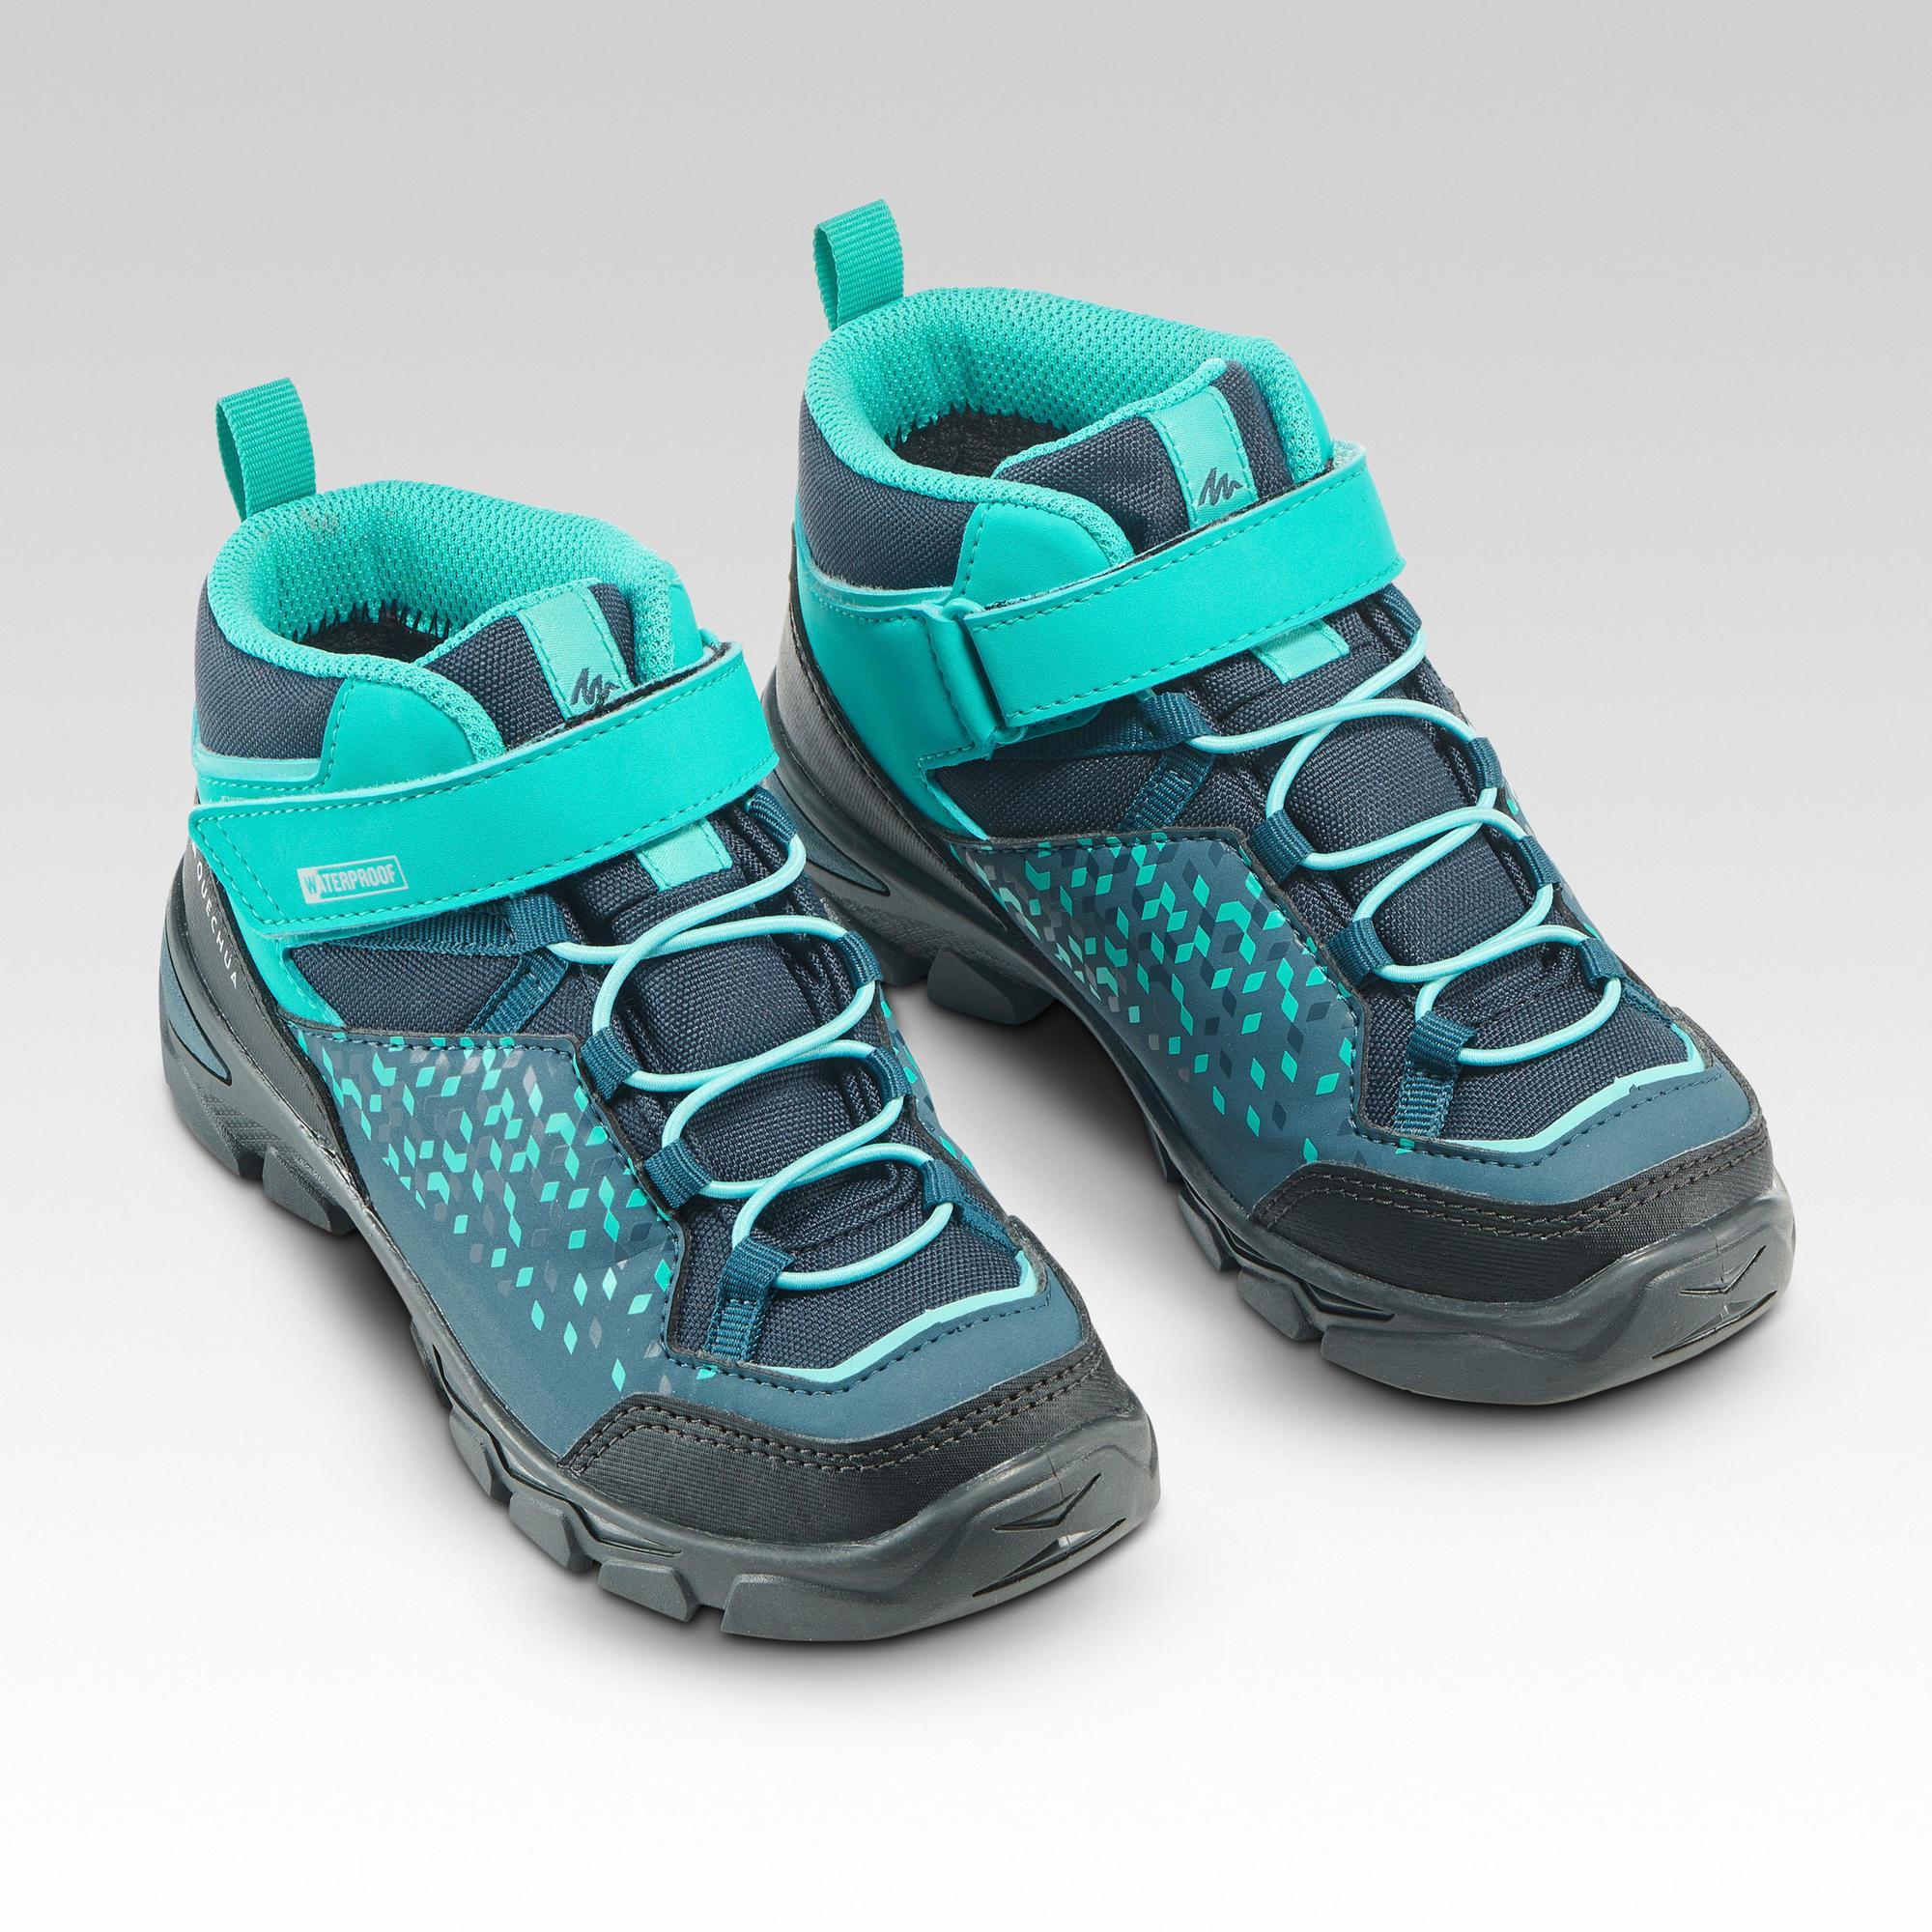 all weather hiking shoes